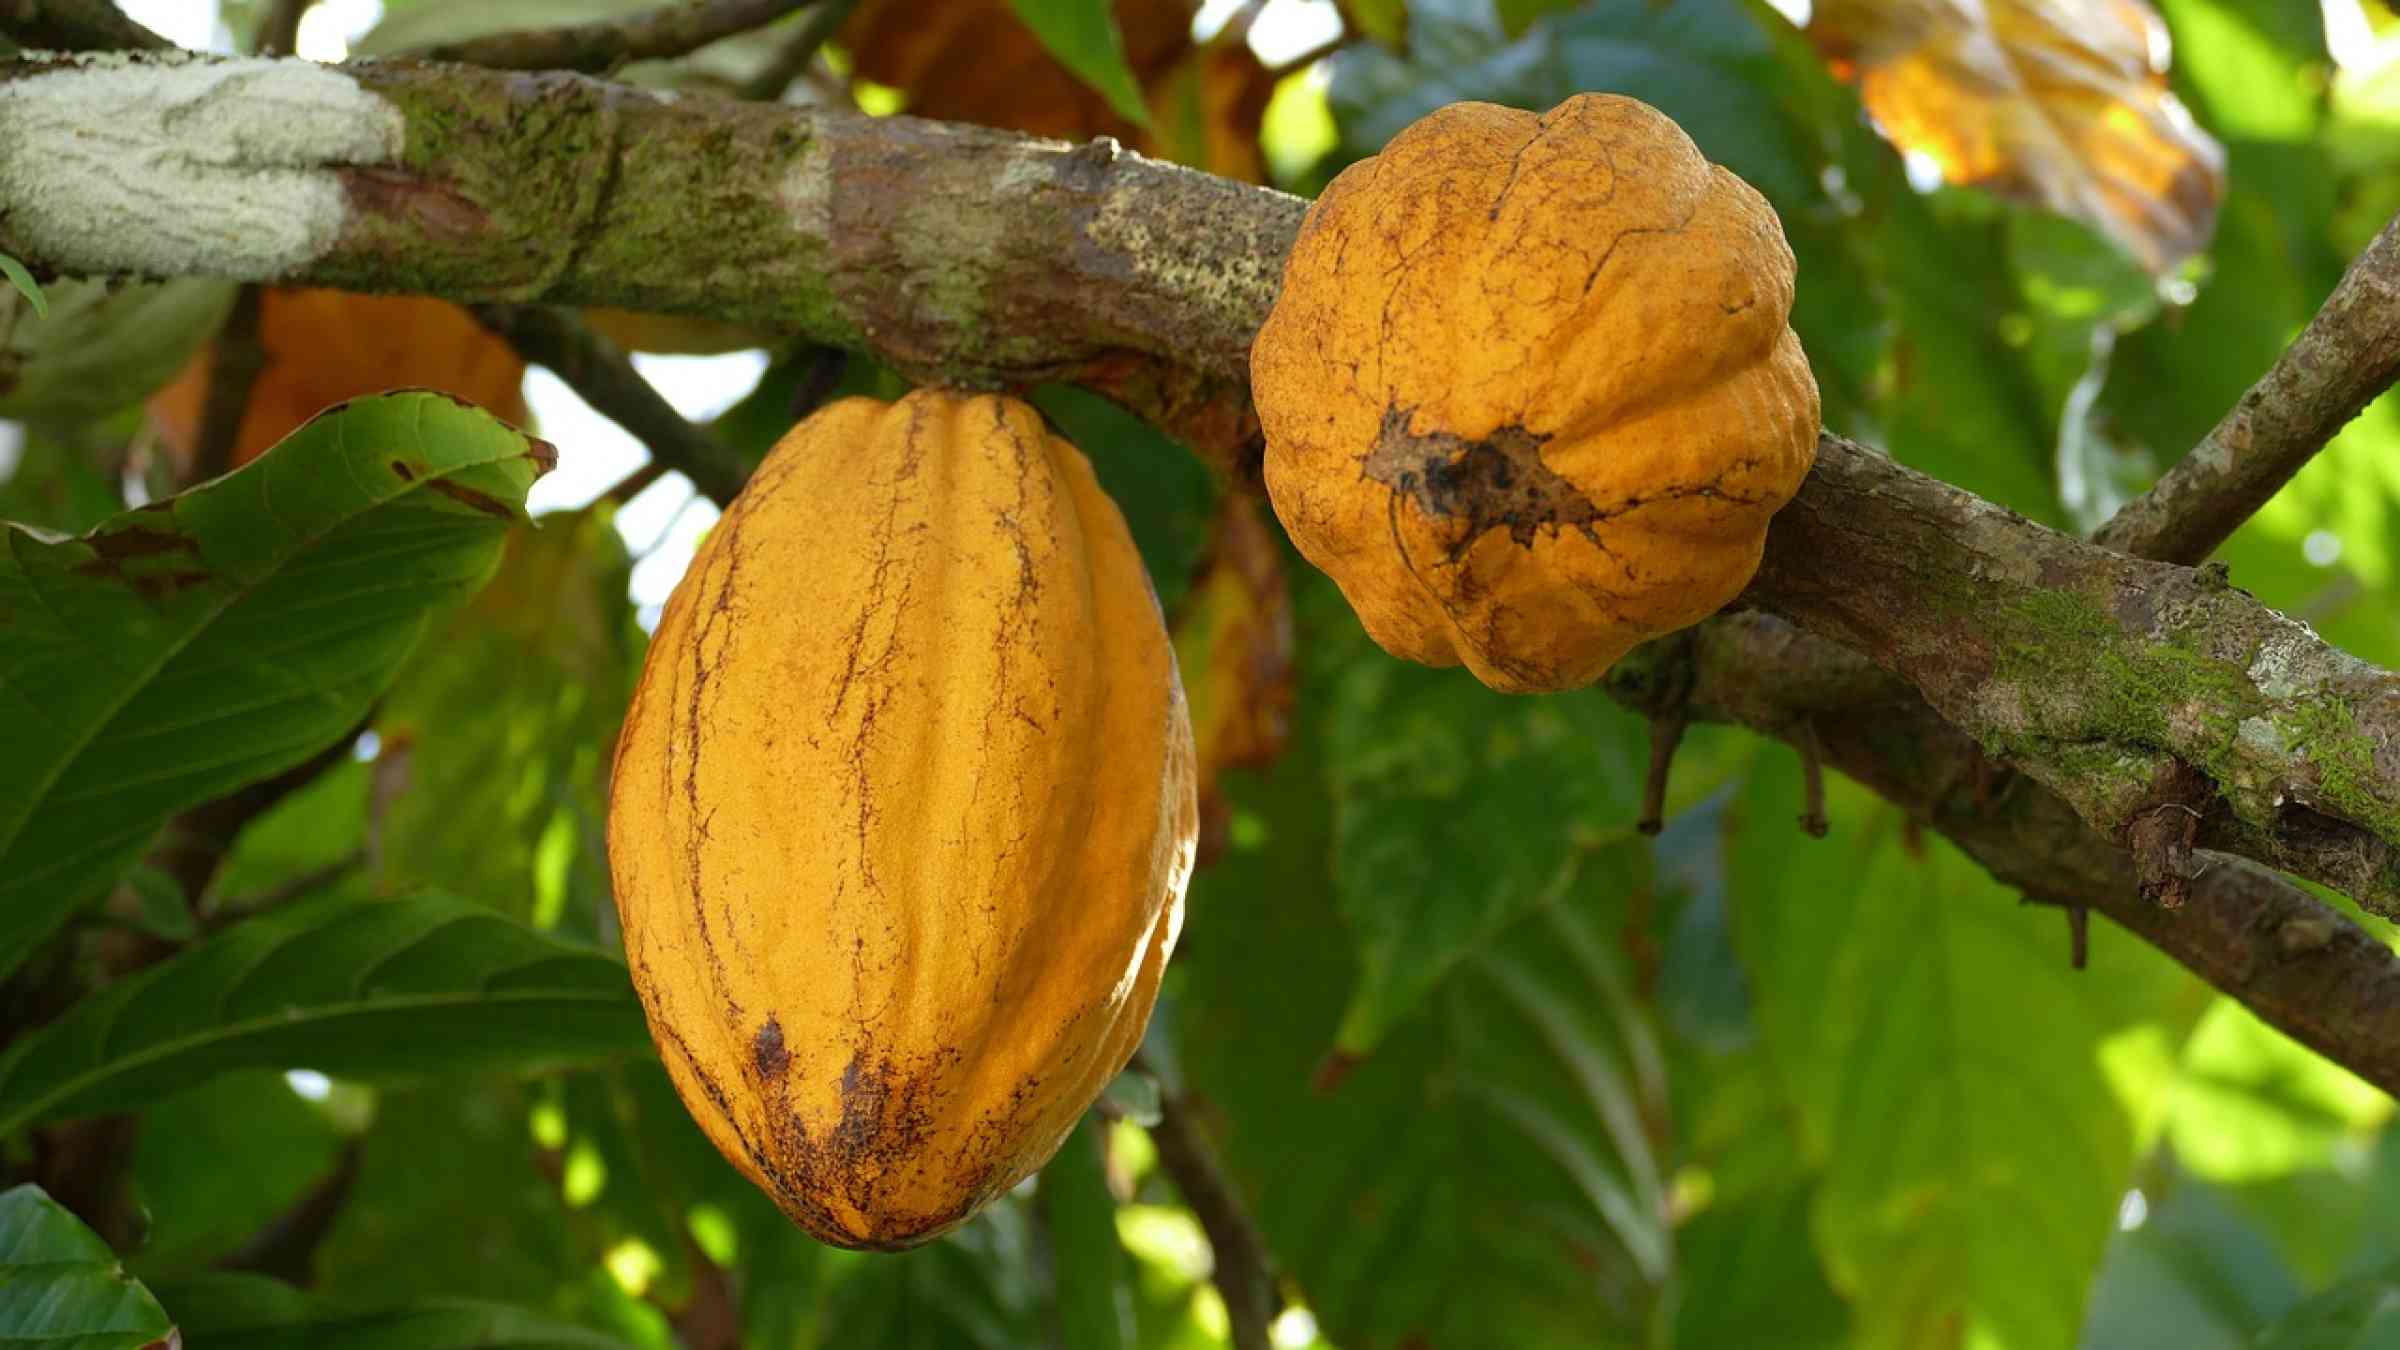 Cocoa fruit attached to the tree